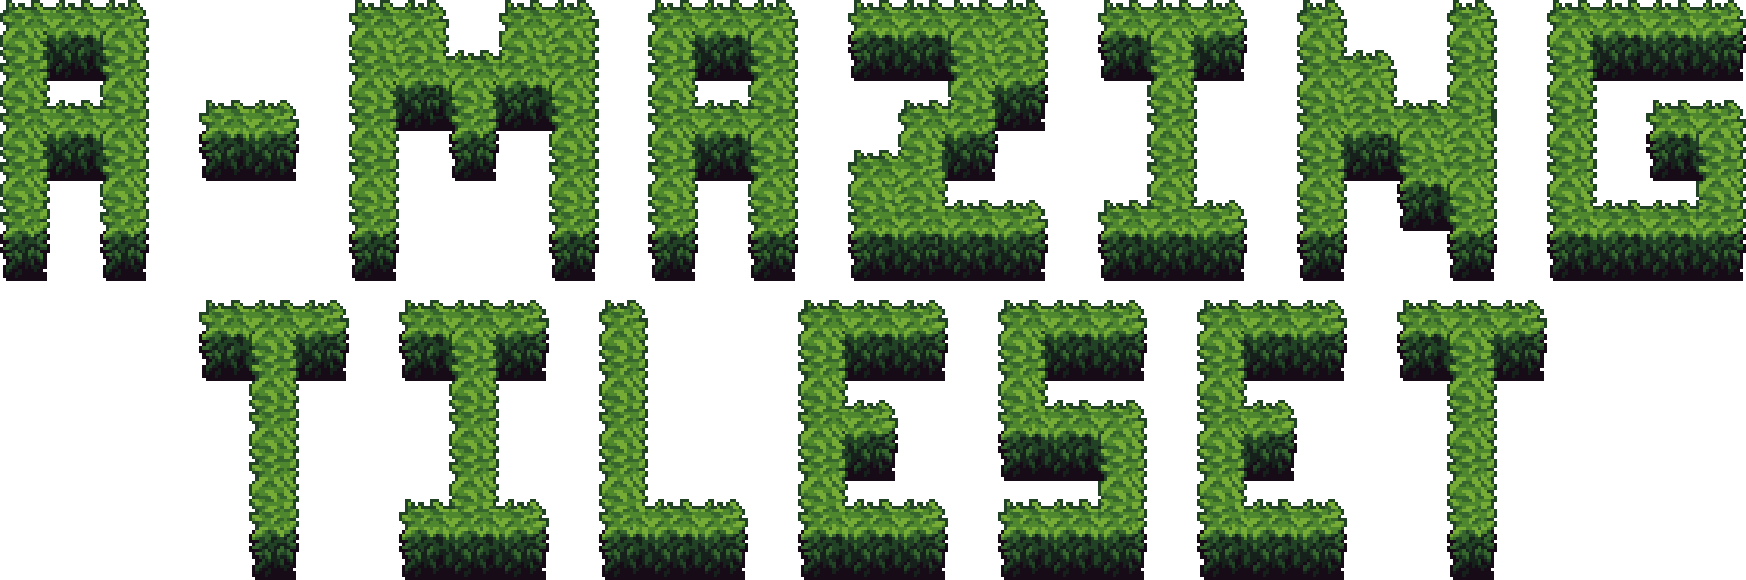 A-Mazing Tileset #1 - Hedge